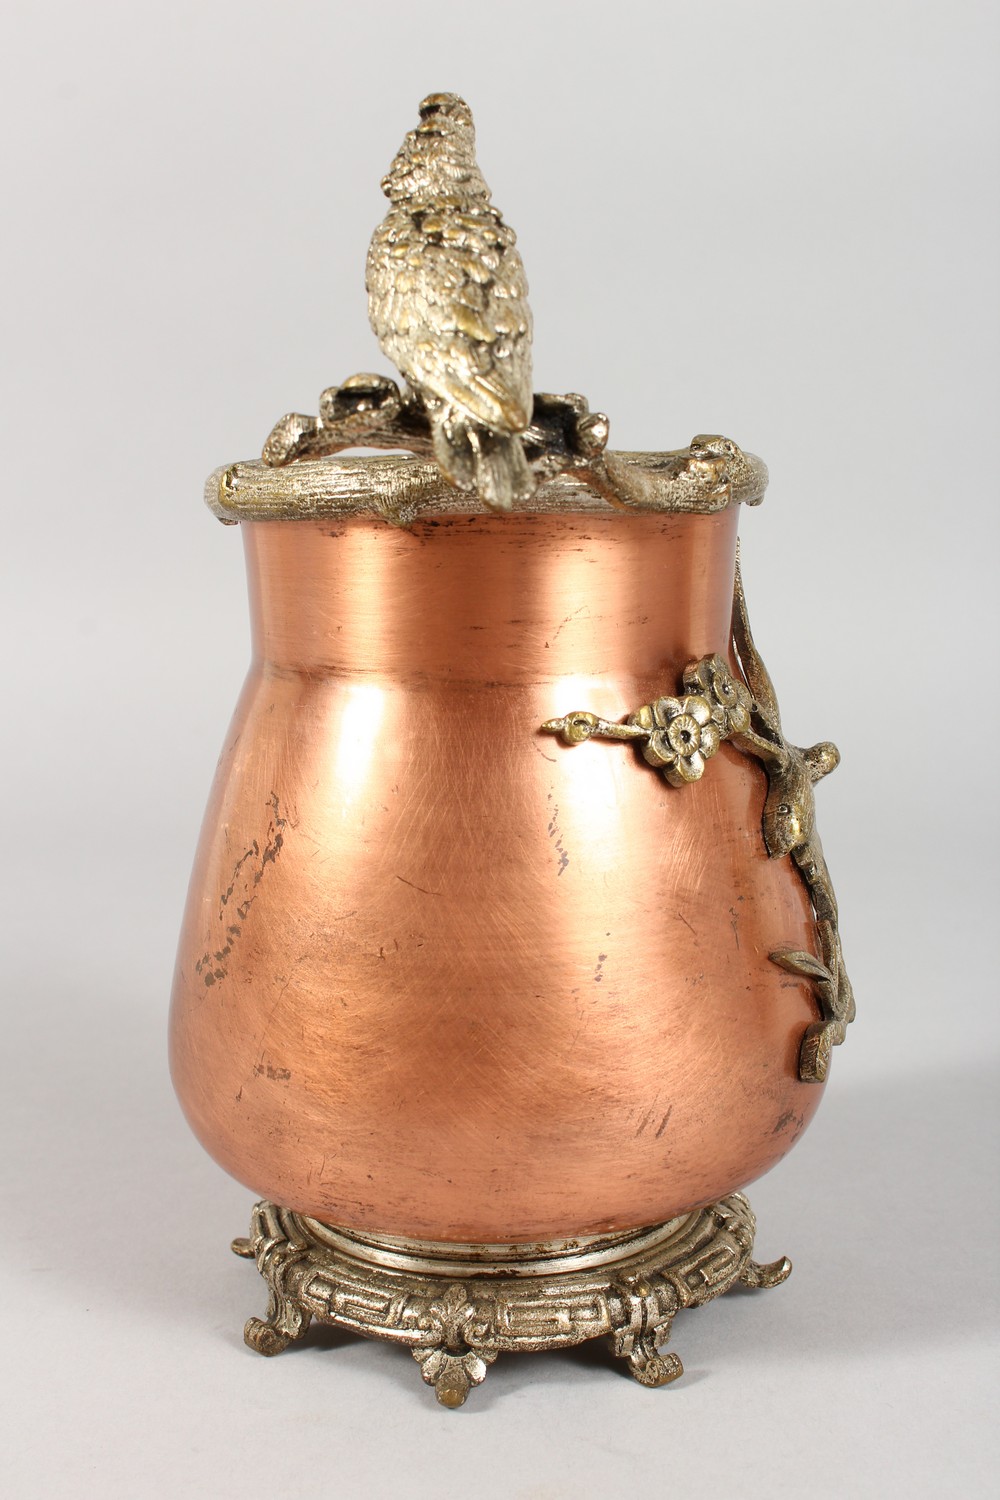 A COPPER VASE, with cast metal mounts, modelled as birds. 8ins high. - Image 6 of 8